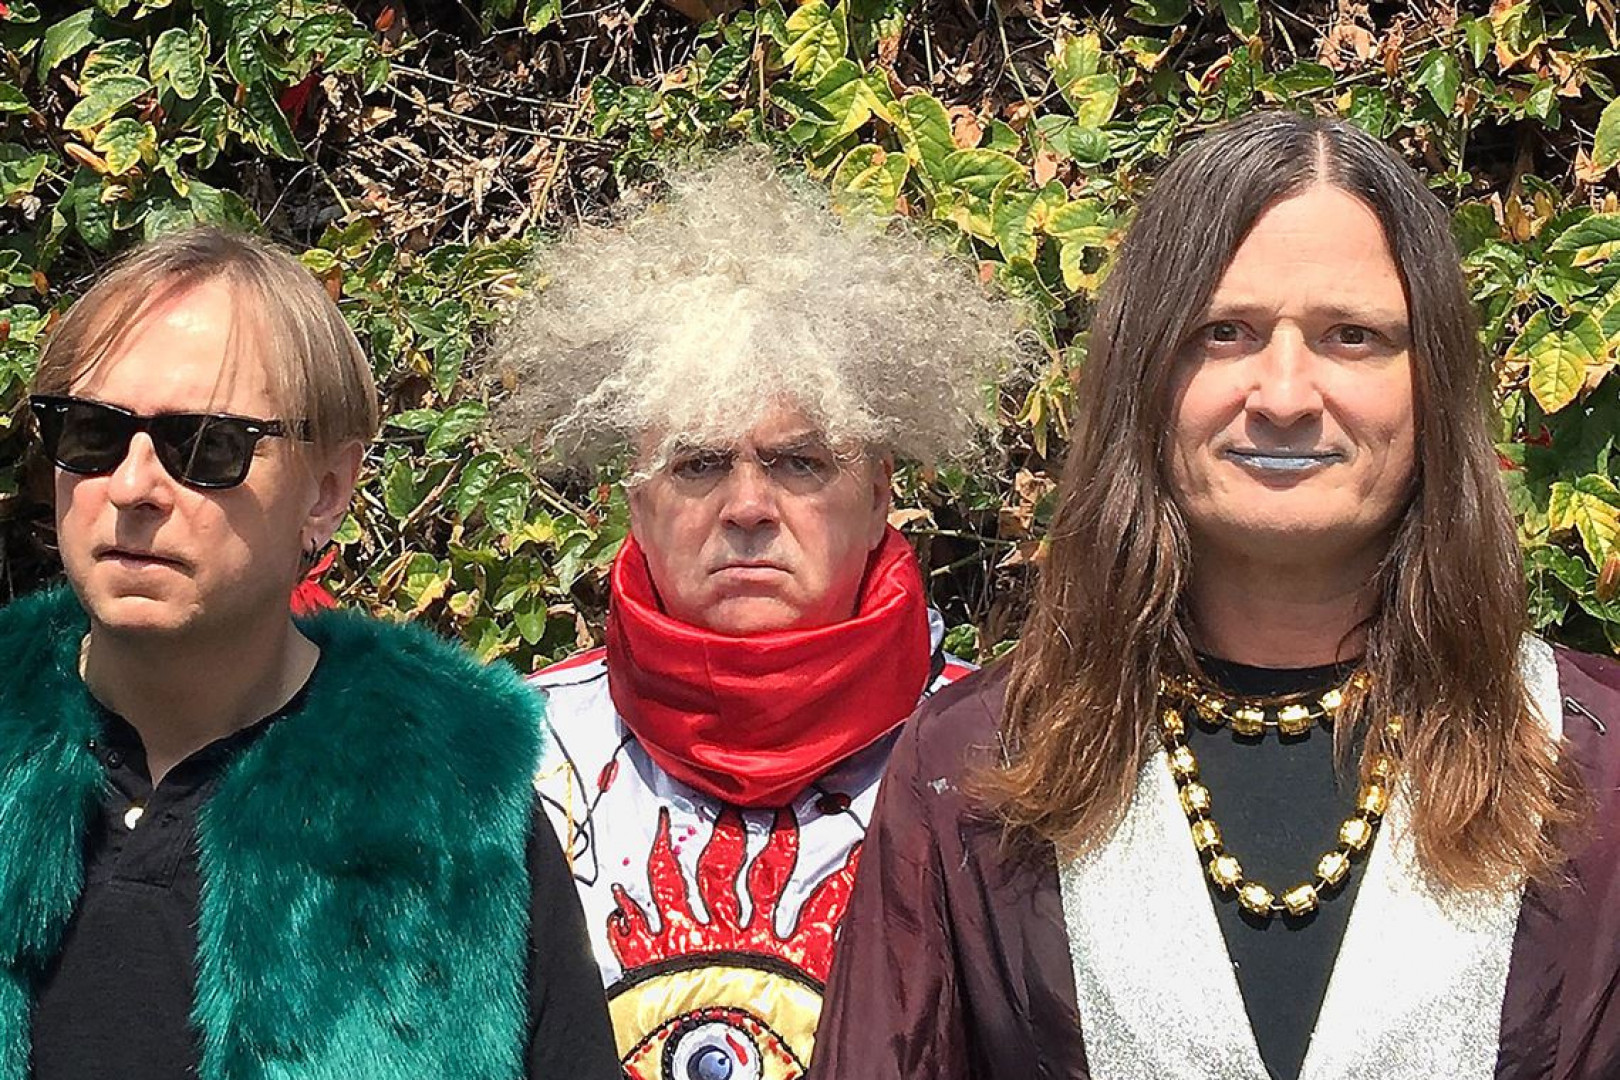 The Melvins reflect on the 40th Year of The Melvins